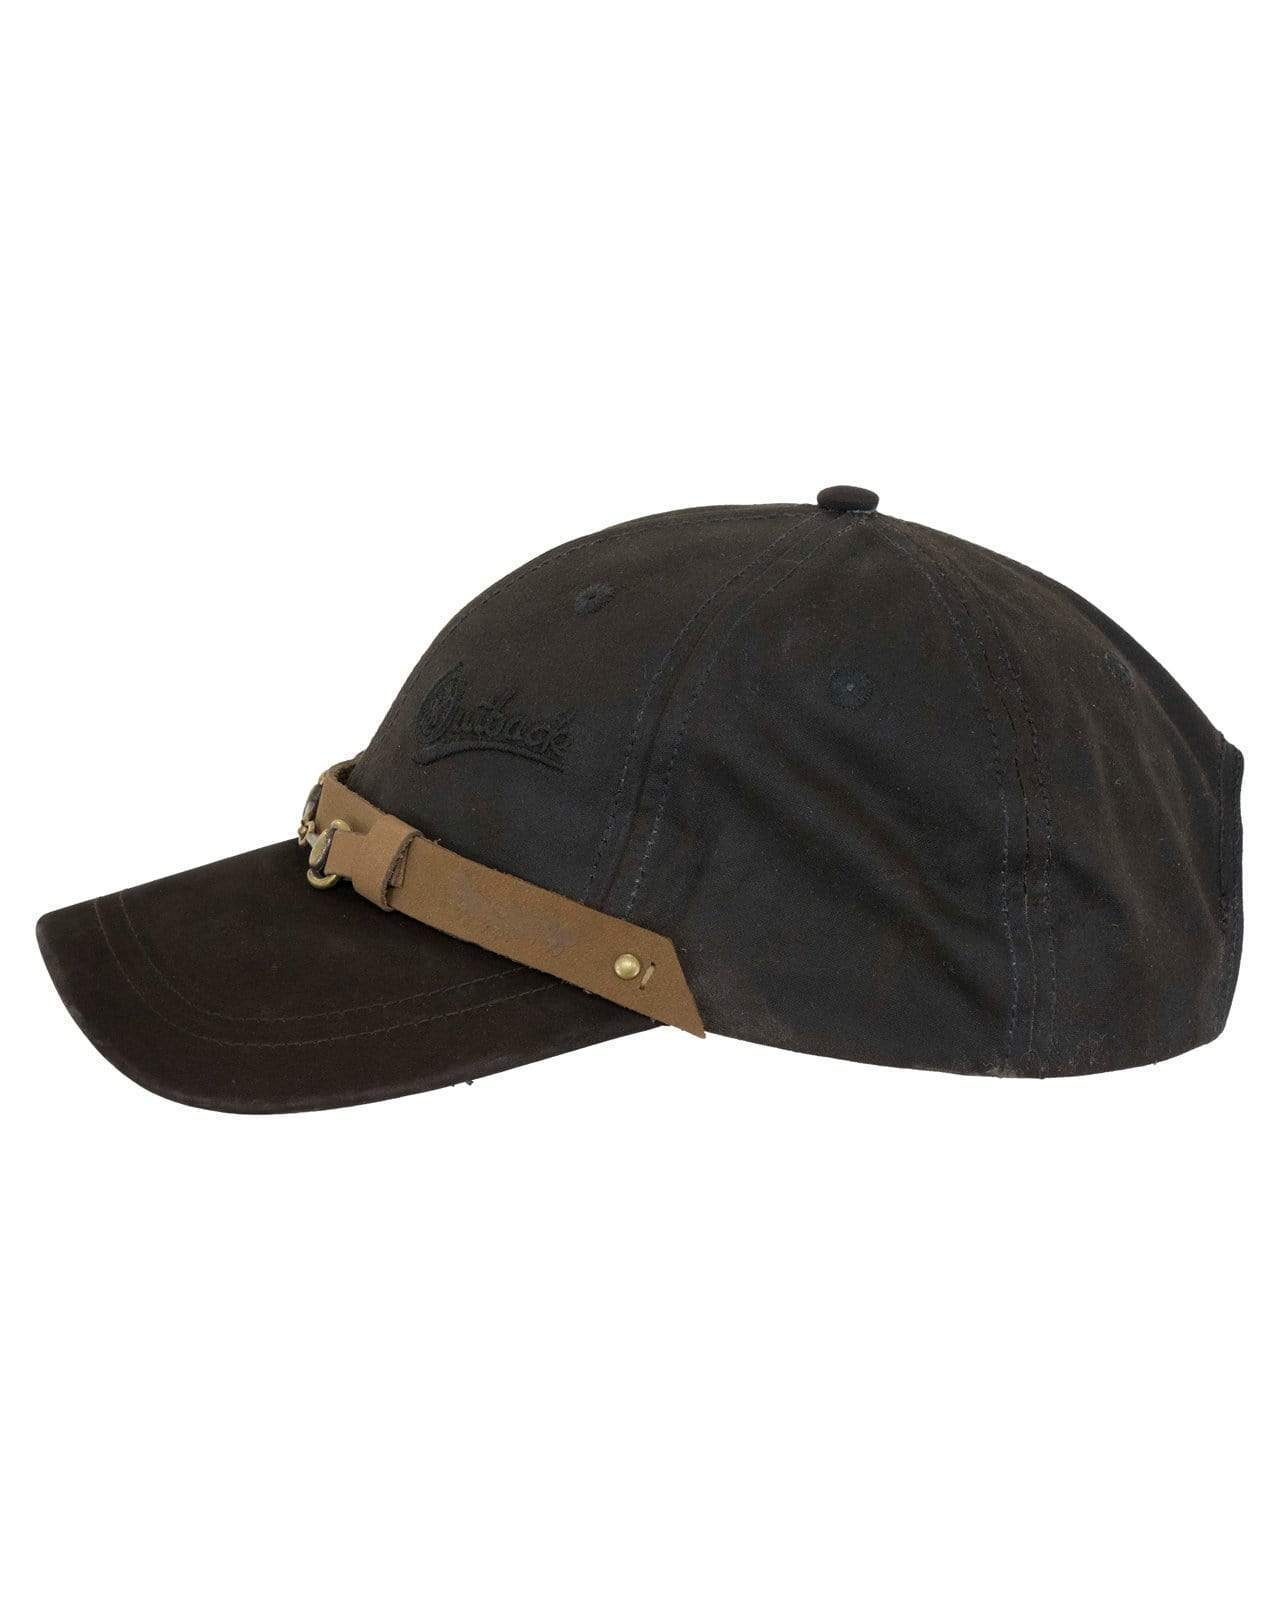 Outback Trading Company Equestrian Cap Hats